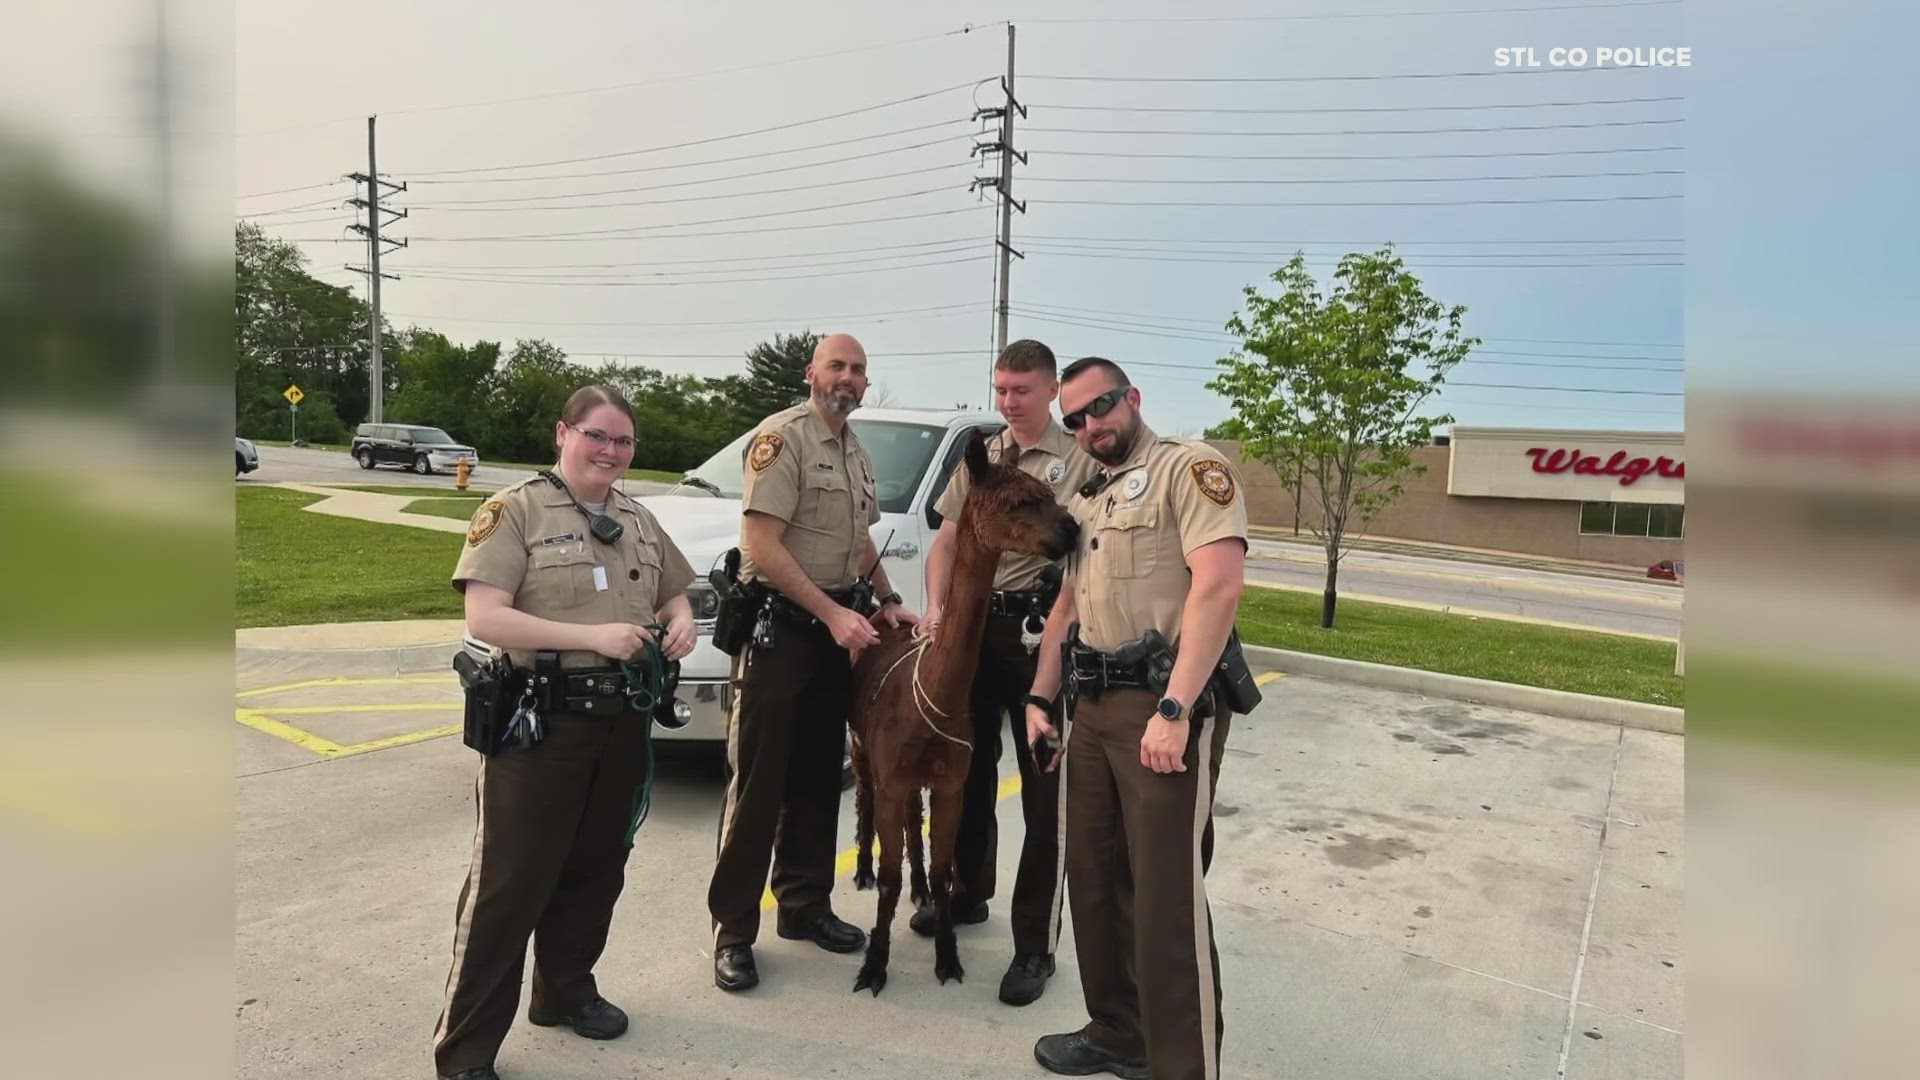 Wednesday in the area of Lusher and Parker, police captured a llama after a brief chase in St. Louis County. The llama was returned to its owner.